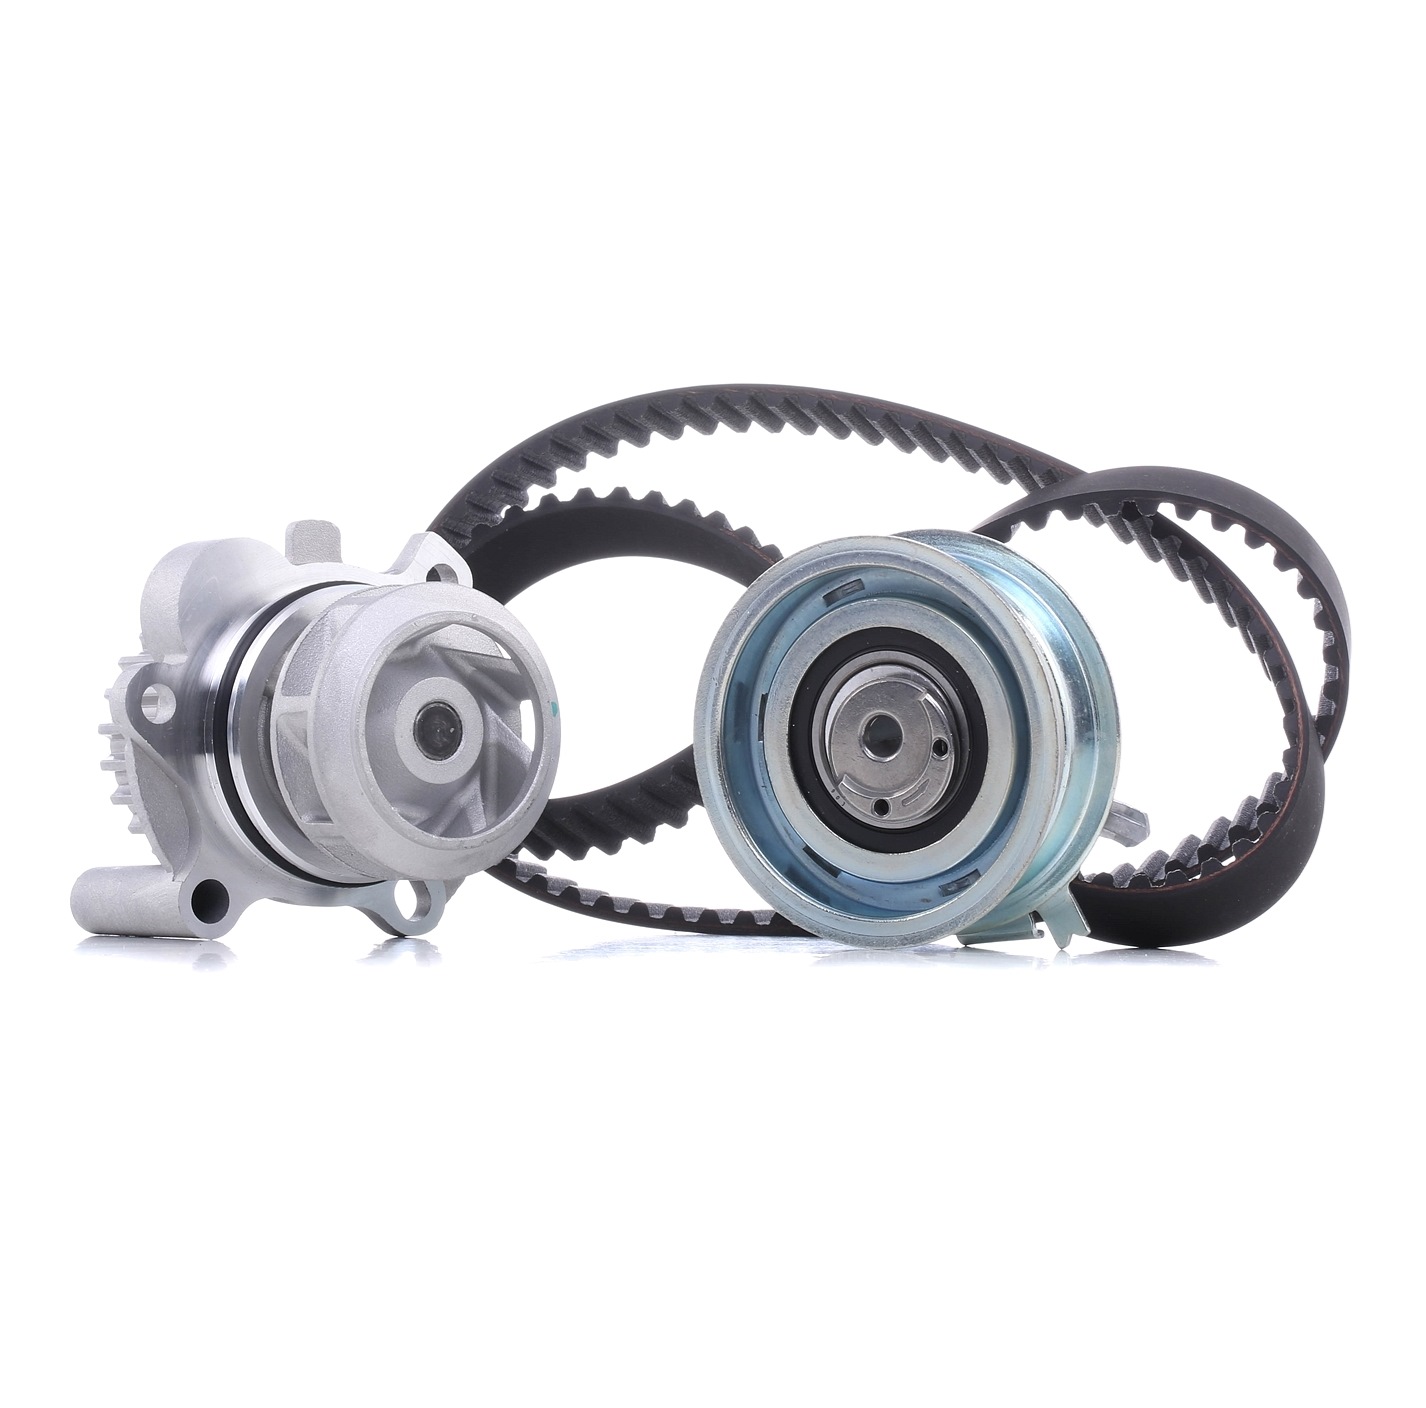 MAGNETI MARELLI 132011160008 Water pump and timing belt kit Number of Teeth: 138 L: 1104 mm, Width: 23 mm